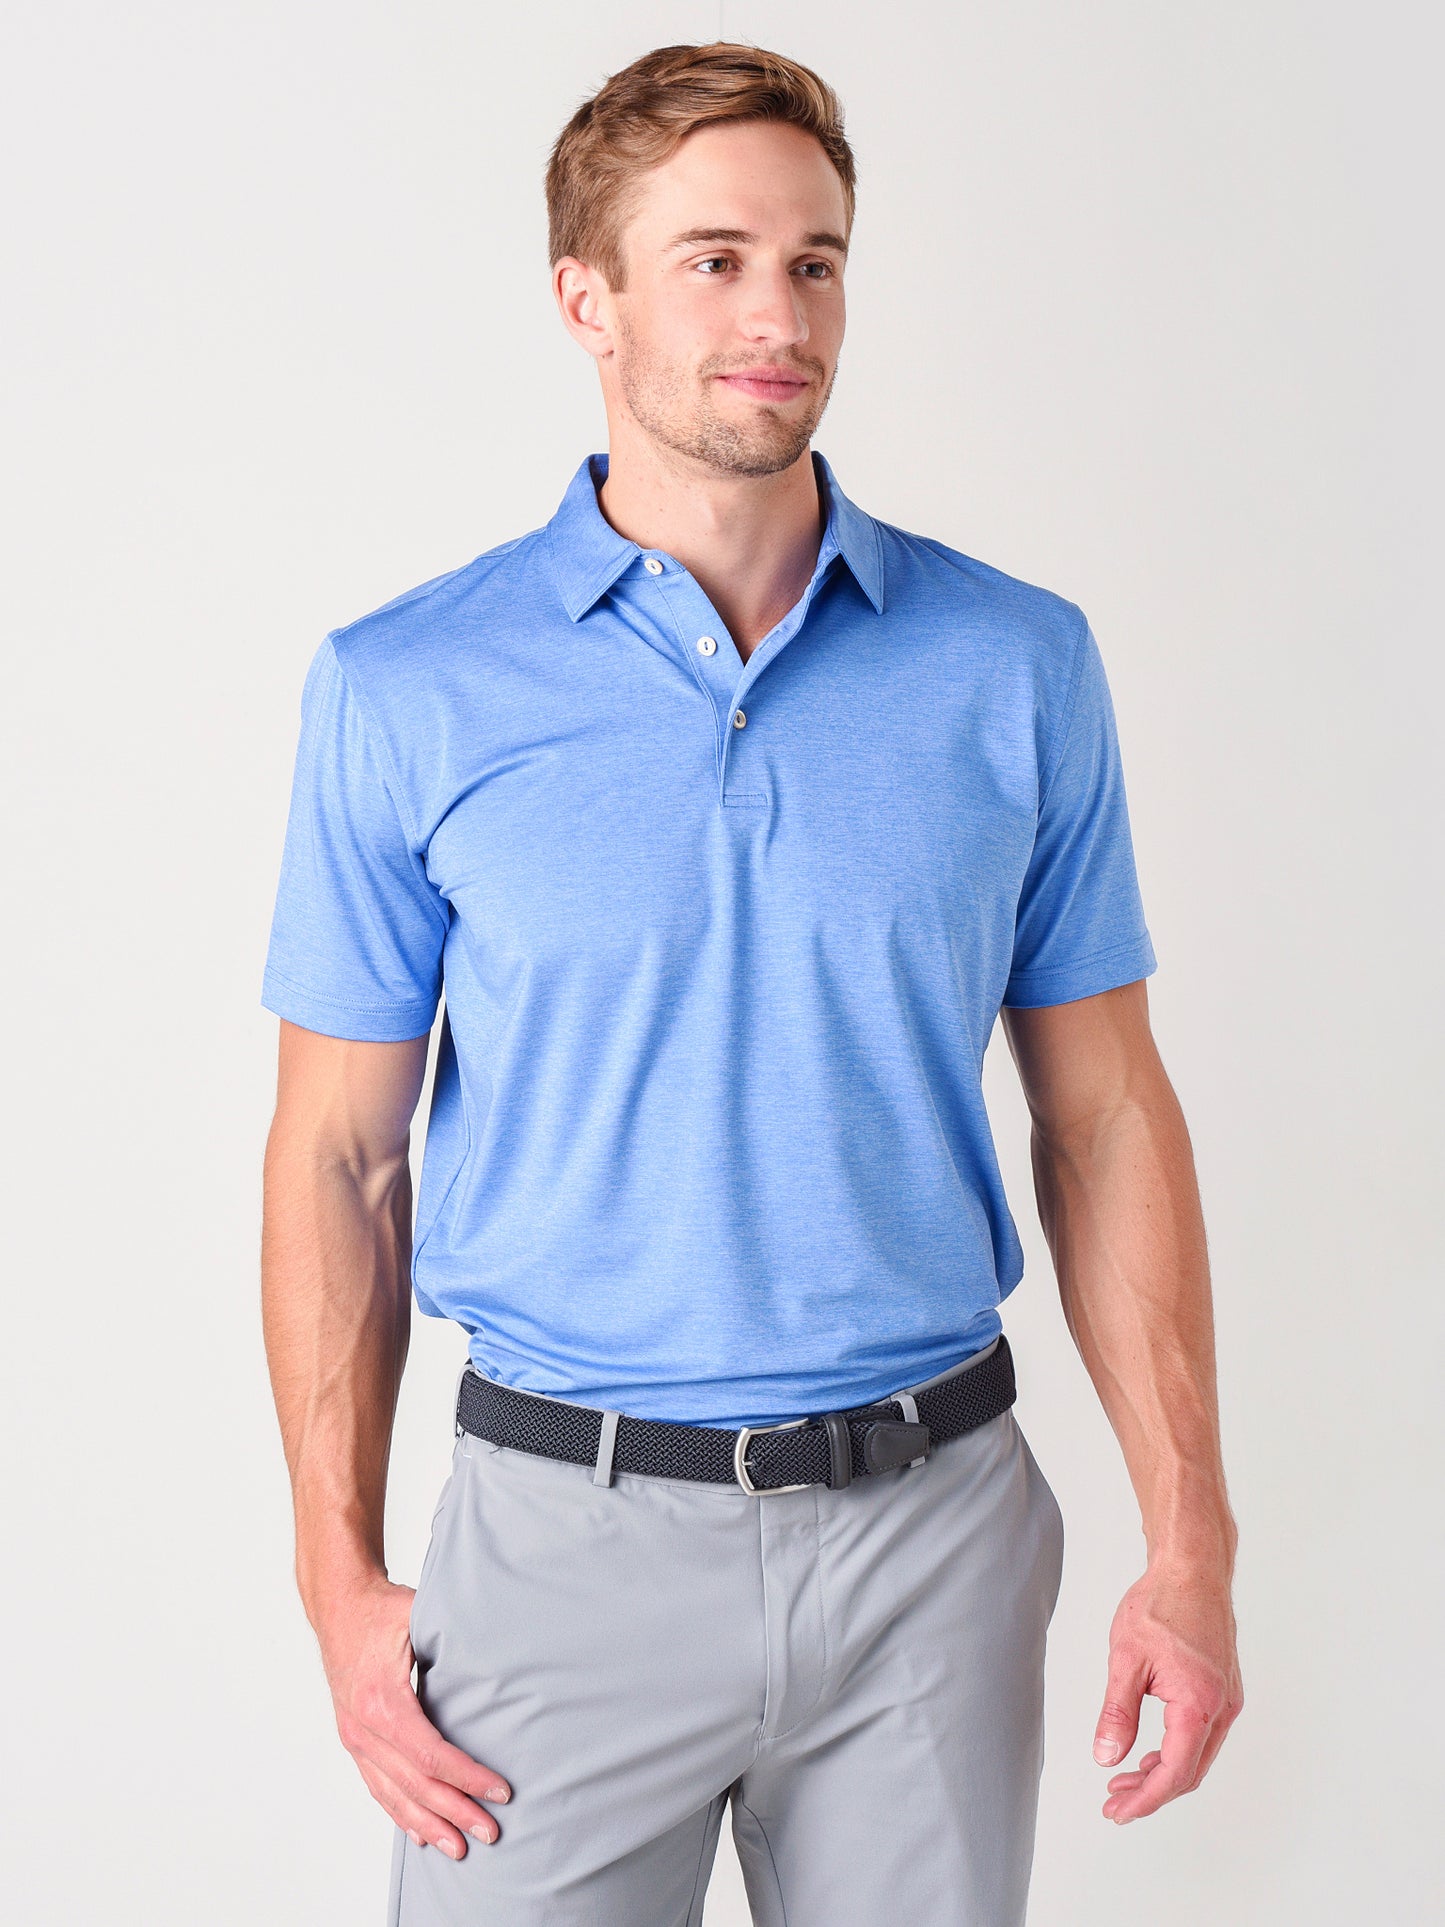 Peter Millar Crown Sport Men's Solid Performance Polo